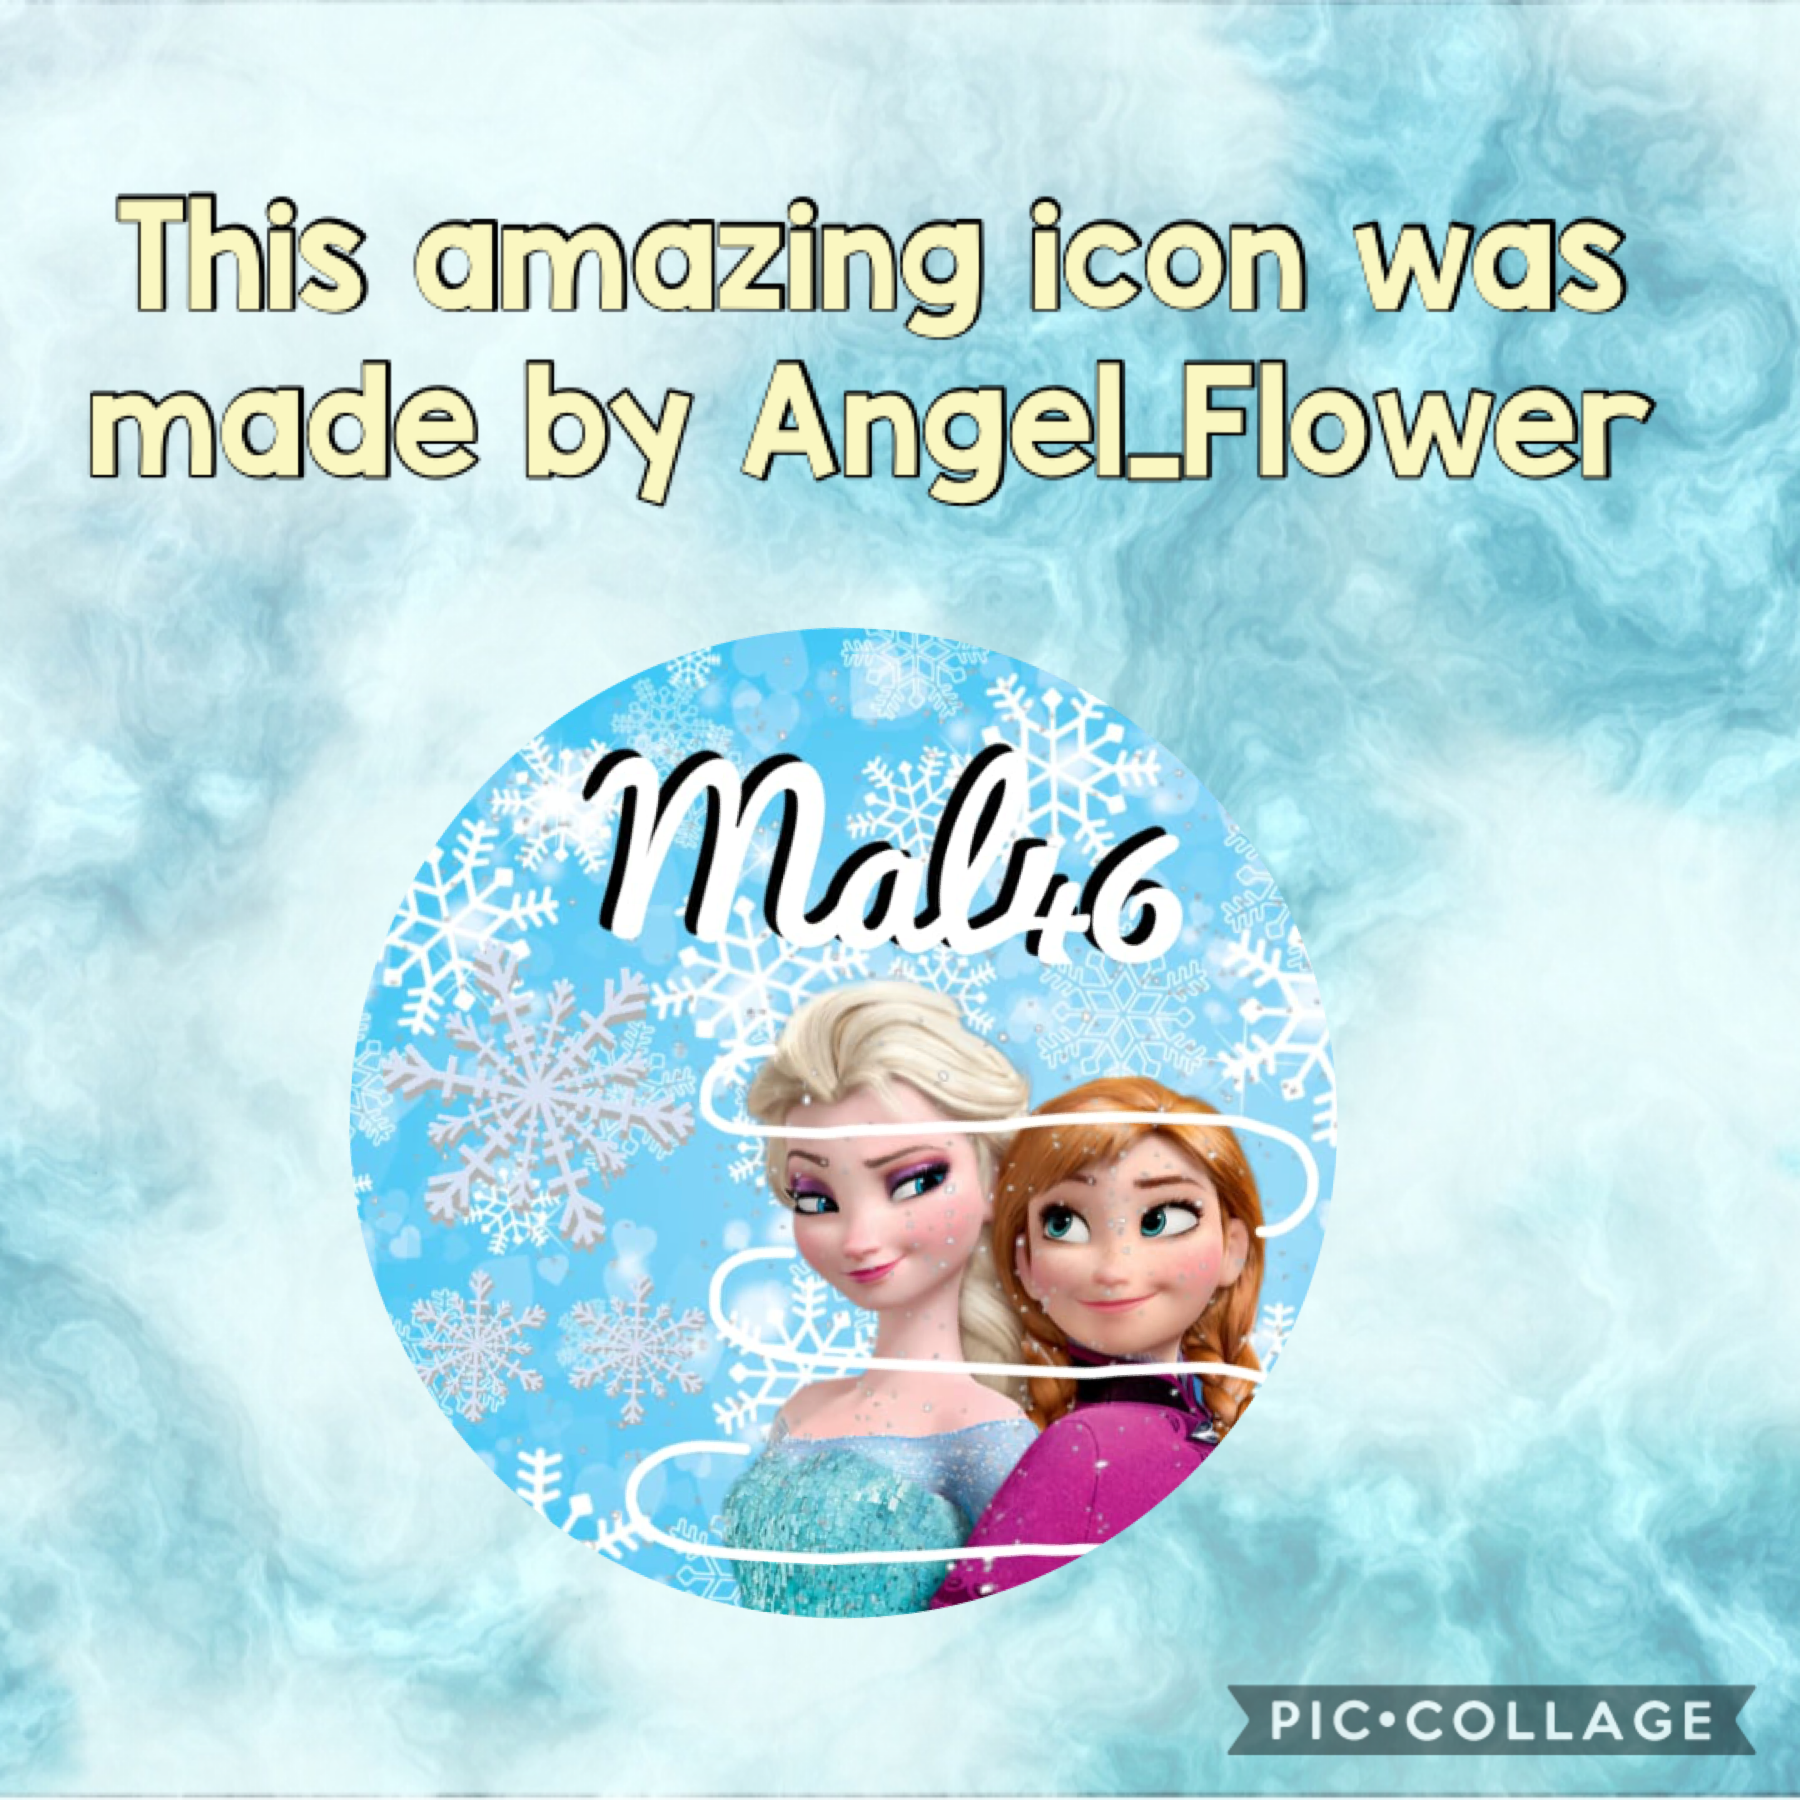 This amazing icon was made by Angel_Flower